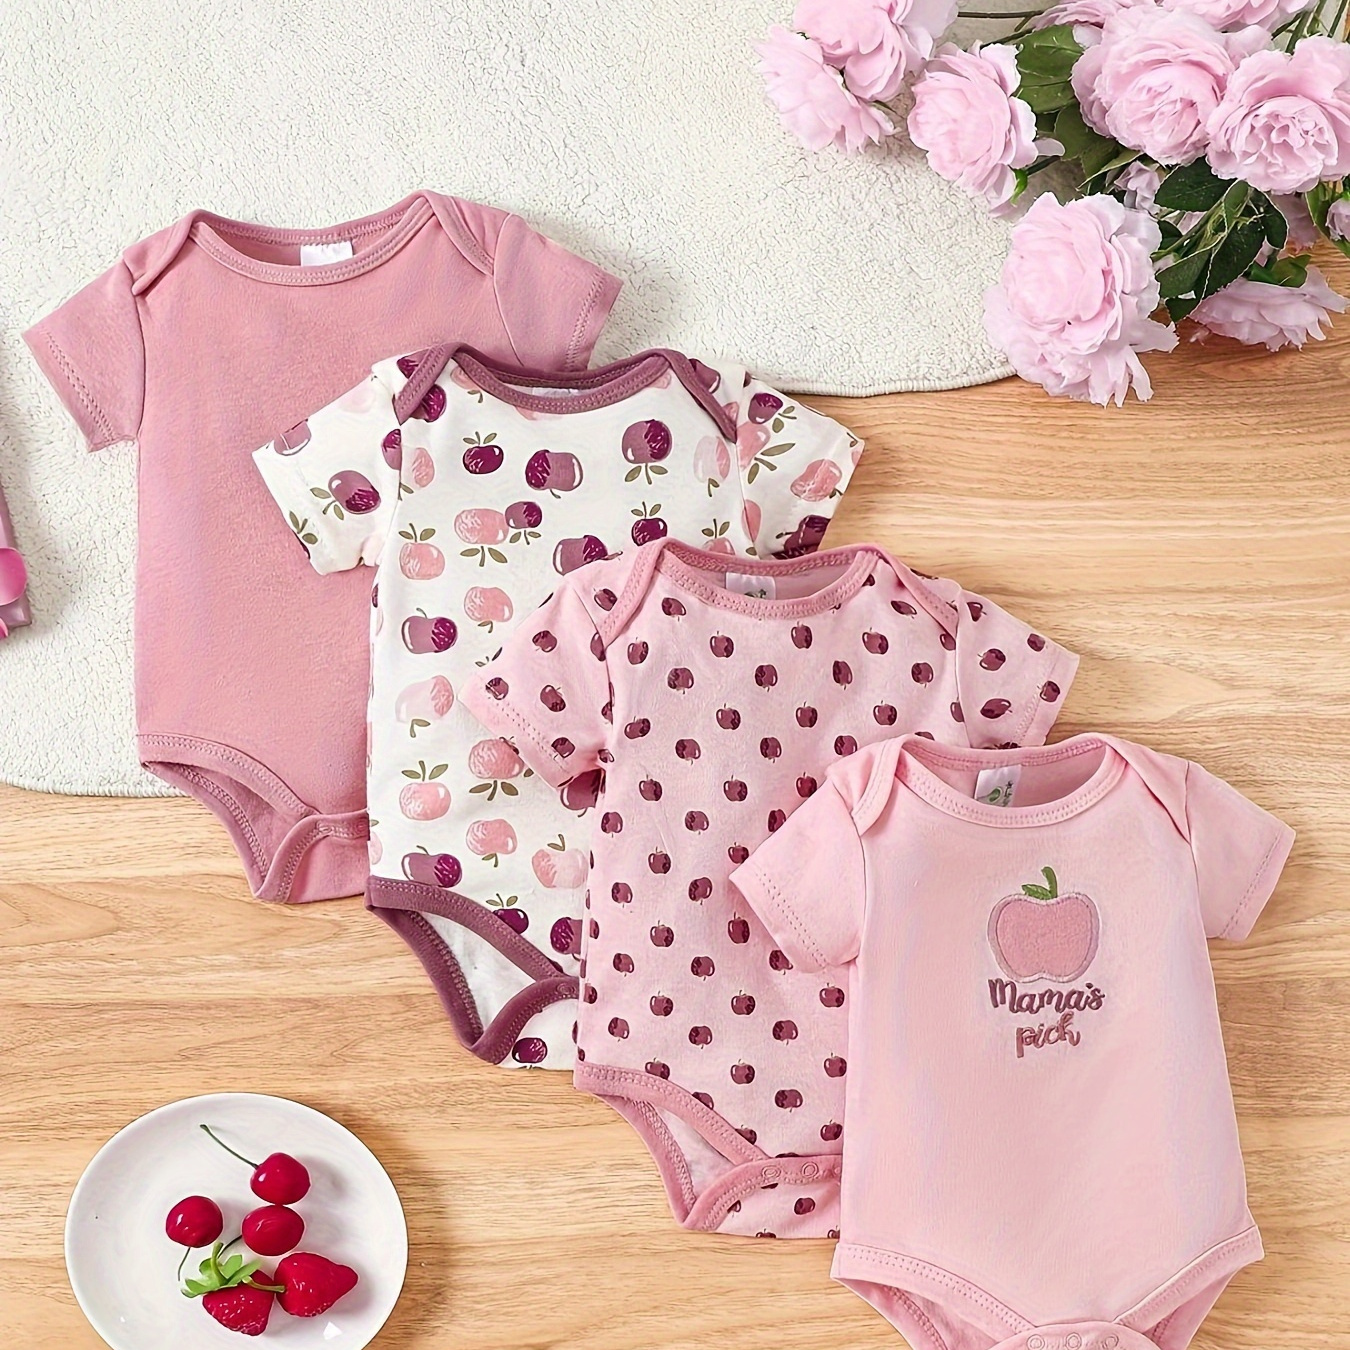 

4pcs Baby's Cartoon Fruit Pattern Cotton Triangle Bodysuit, Casual Short Sleeve Romper, Toddler & Infant Girl's Onesie For Summer, As Gift